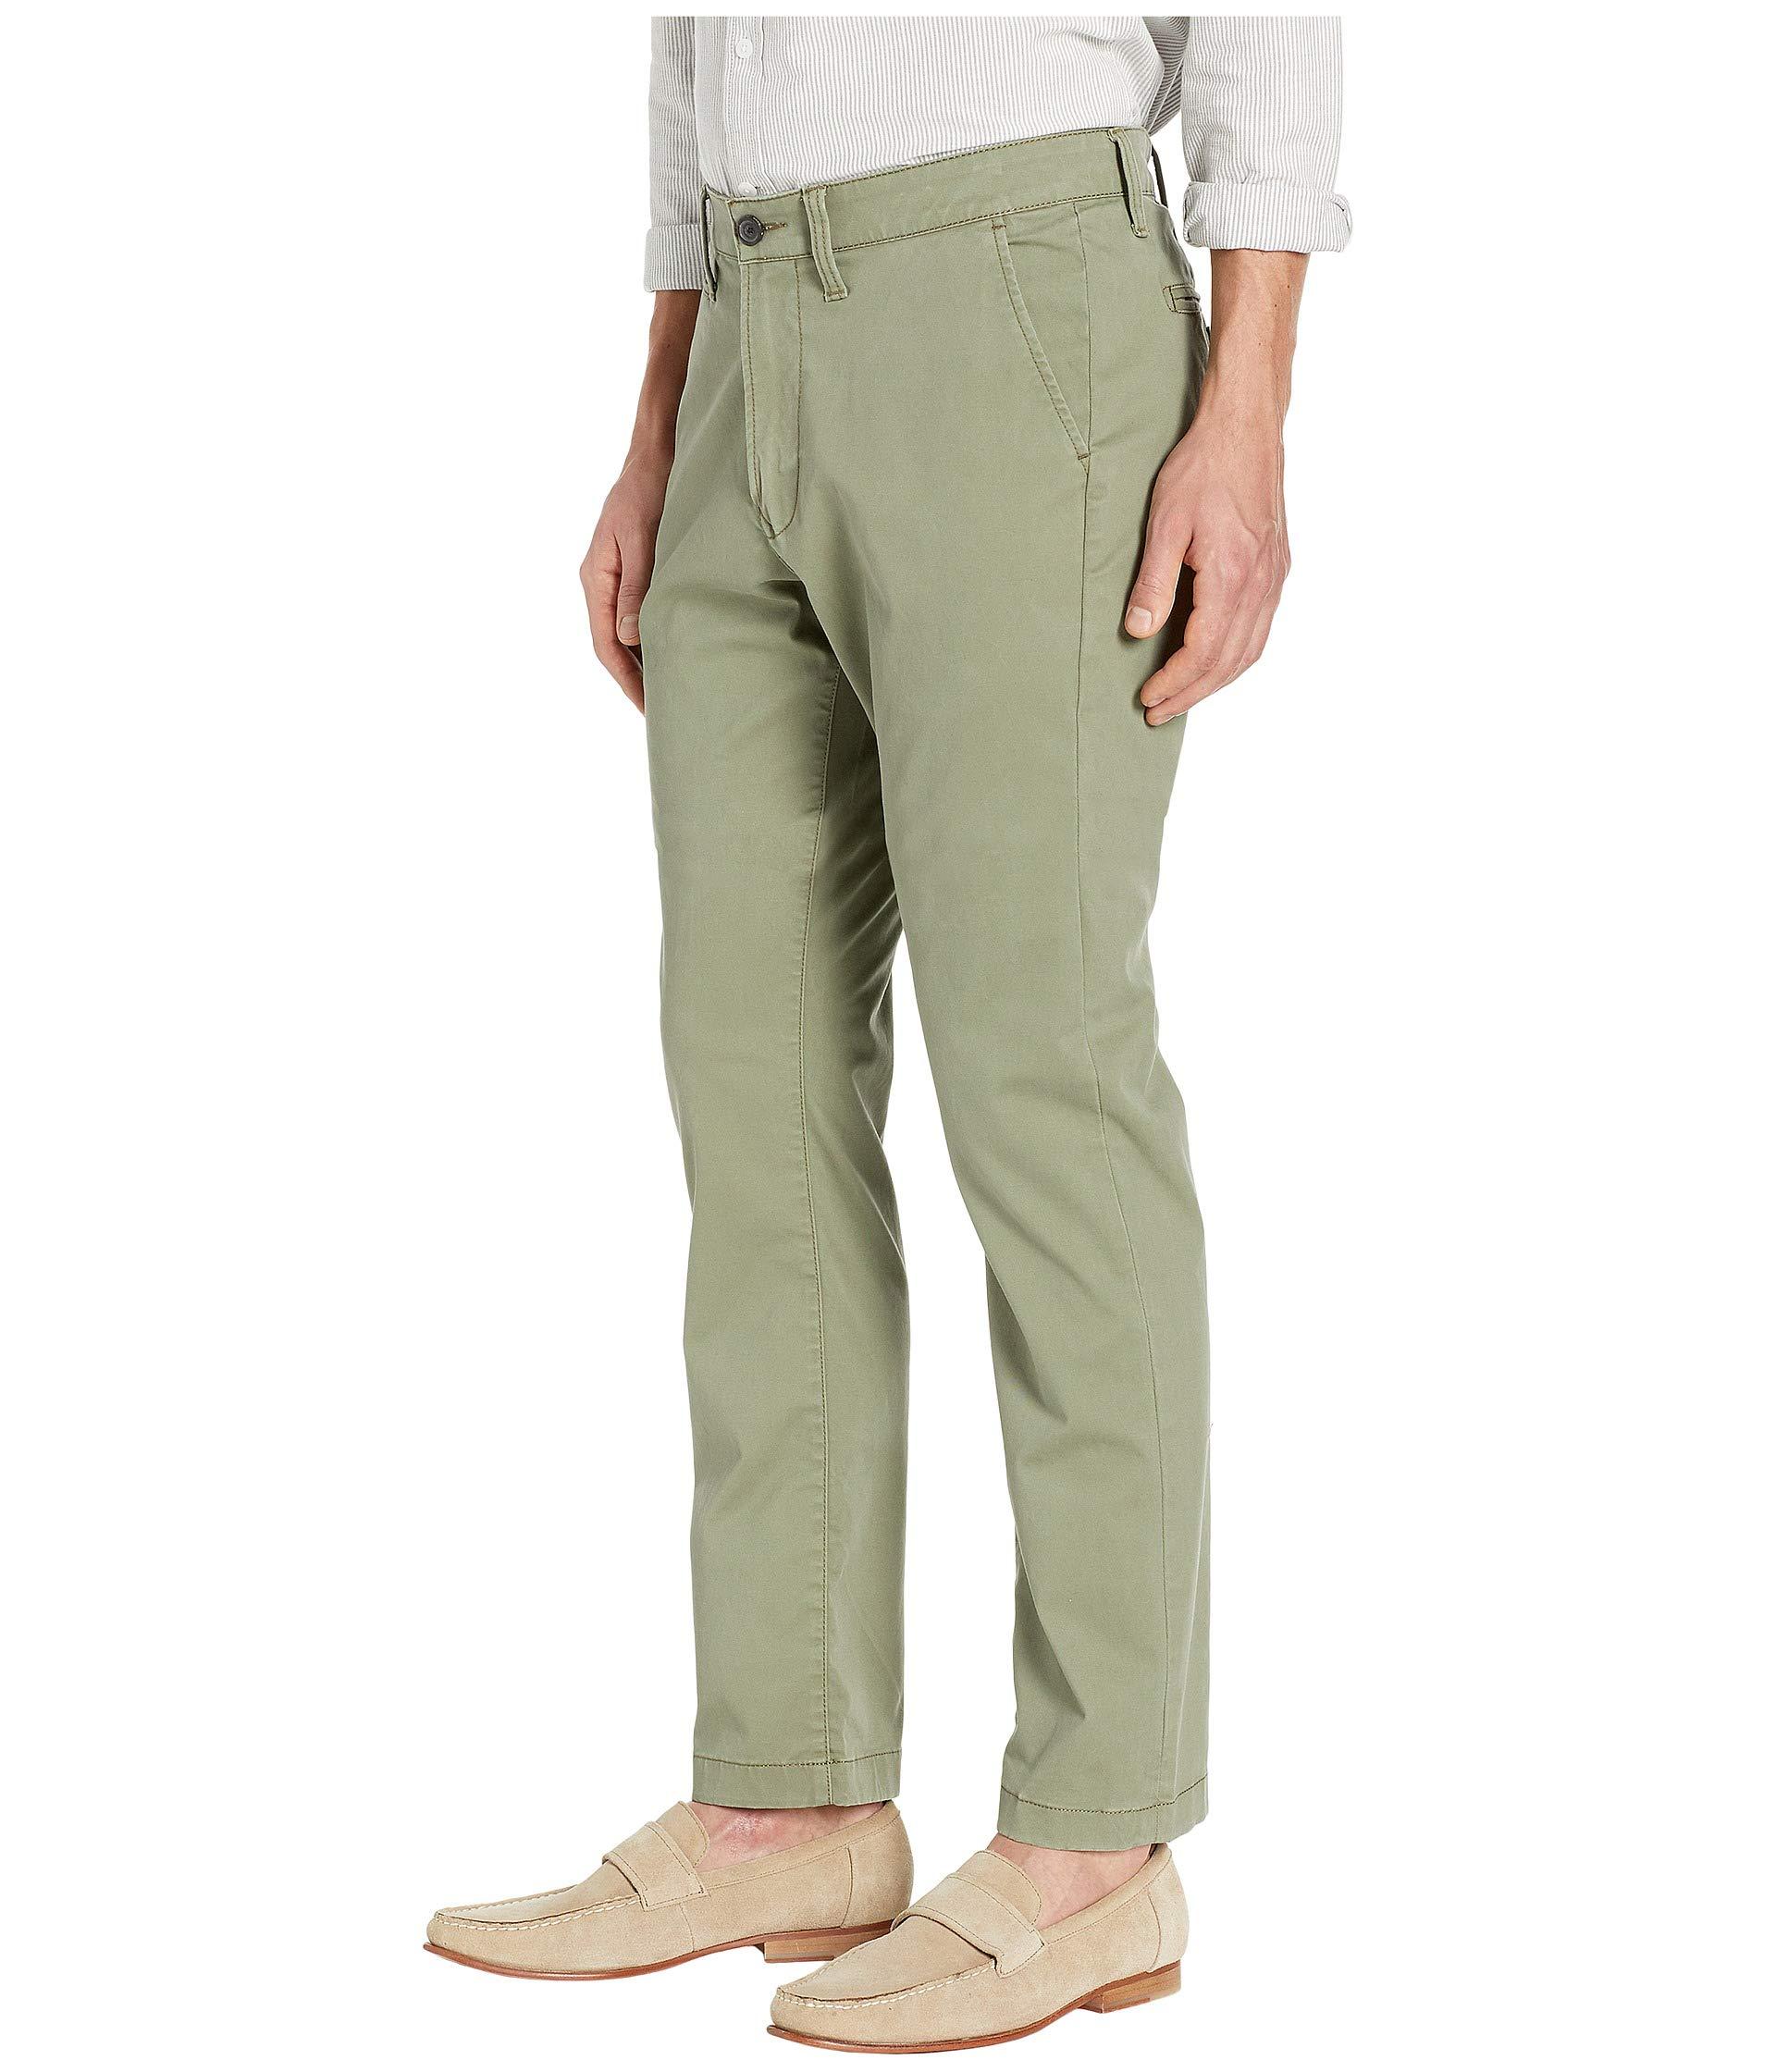 Lucky Brand Cotton Chino Pants in Green for Men - Lyst